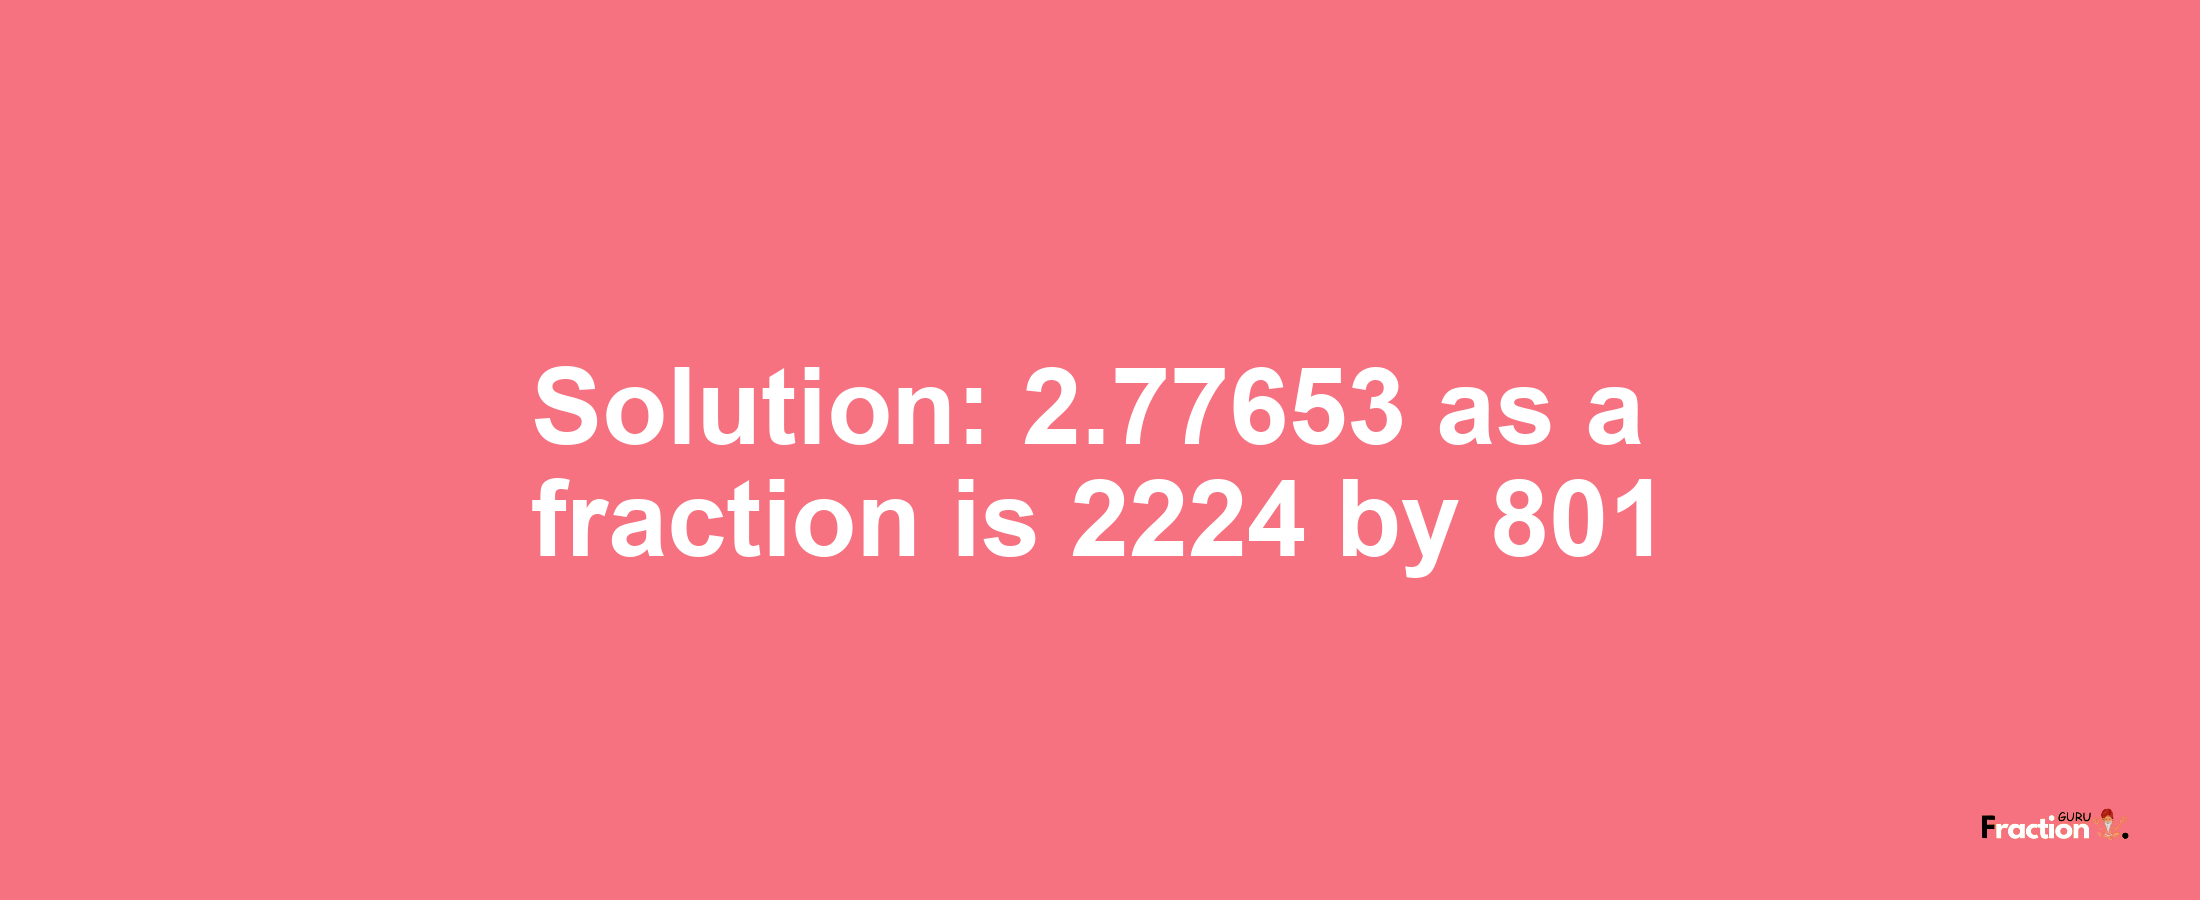 Solution:2.77653 as a fraction is 2224/801